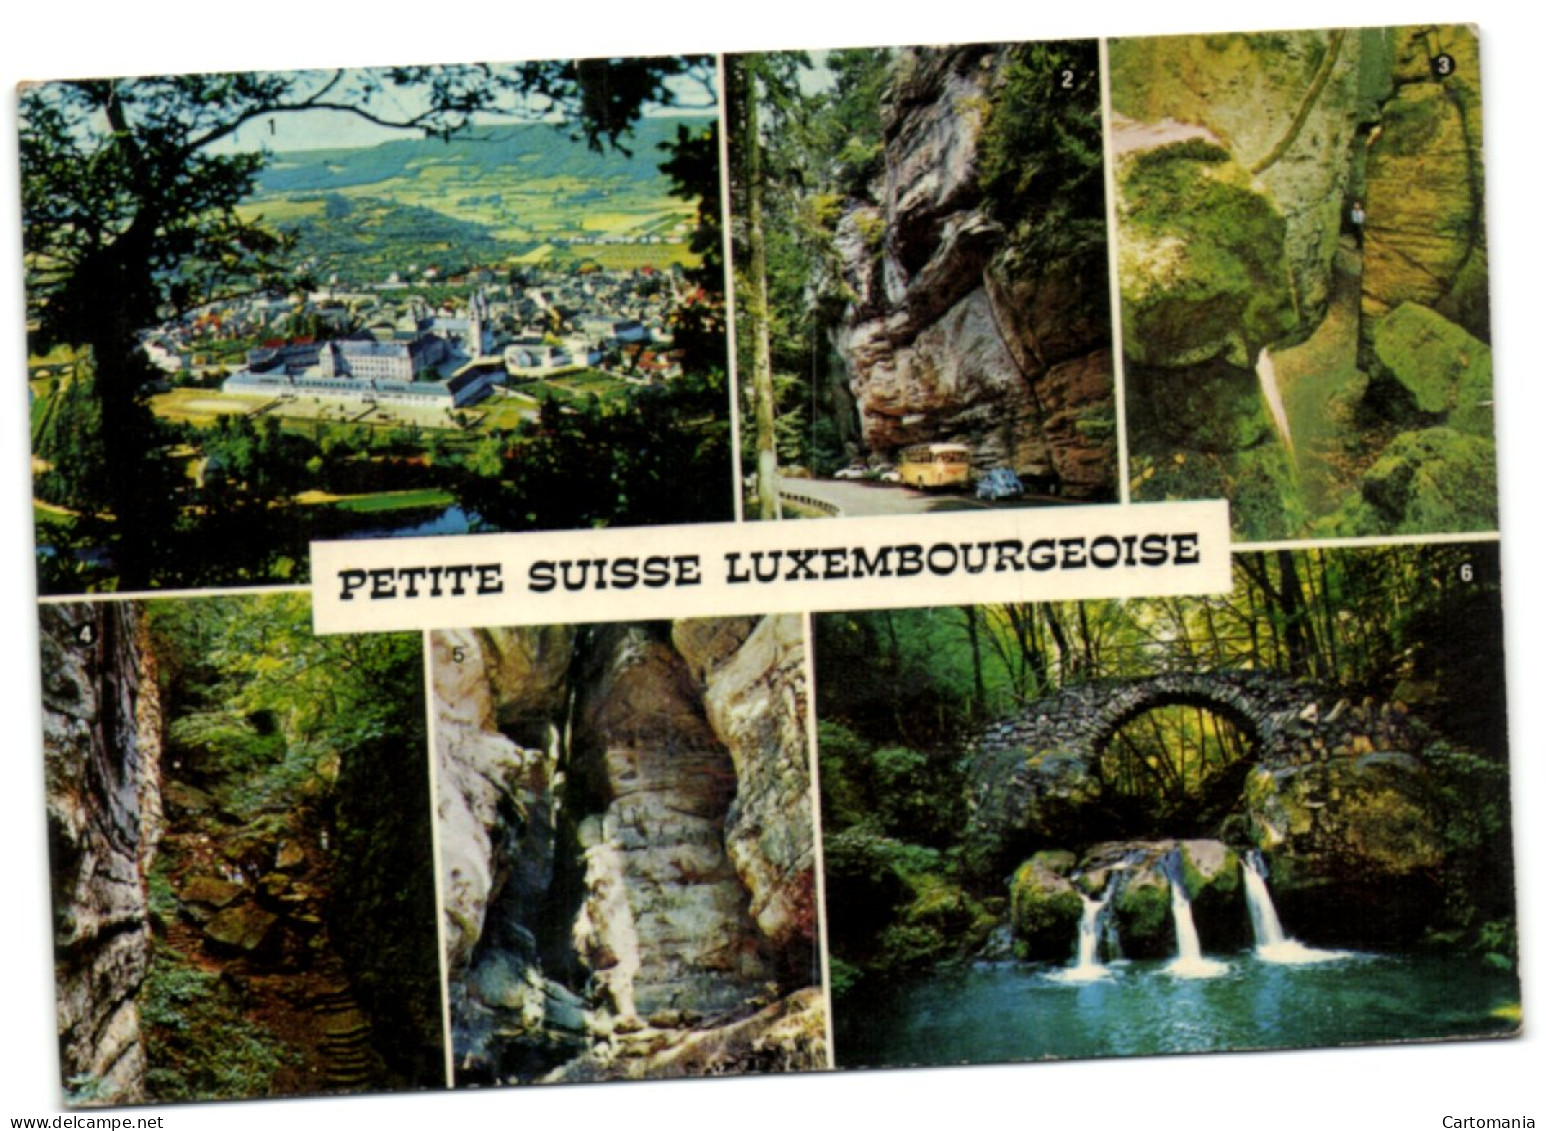 Petite Suisse Luxembourgeoise - Muellerthal